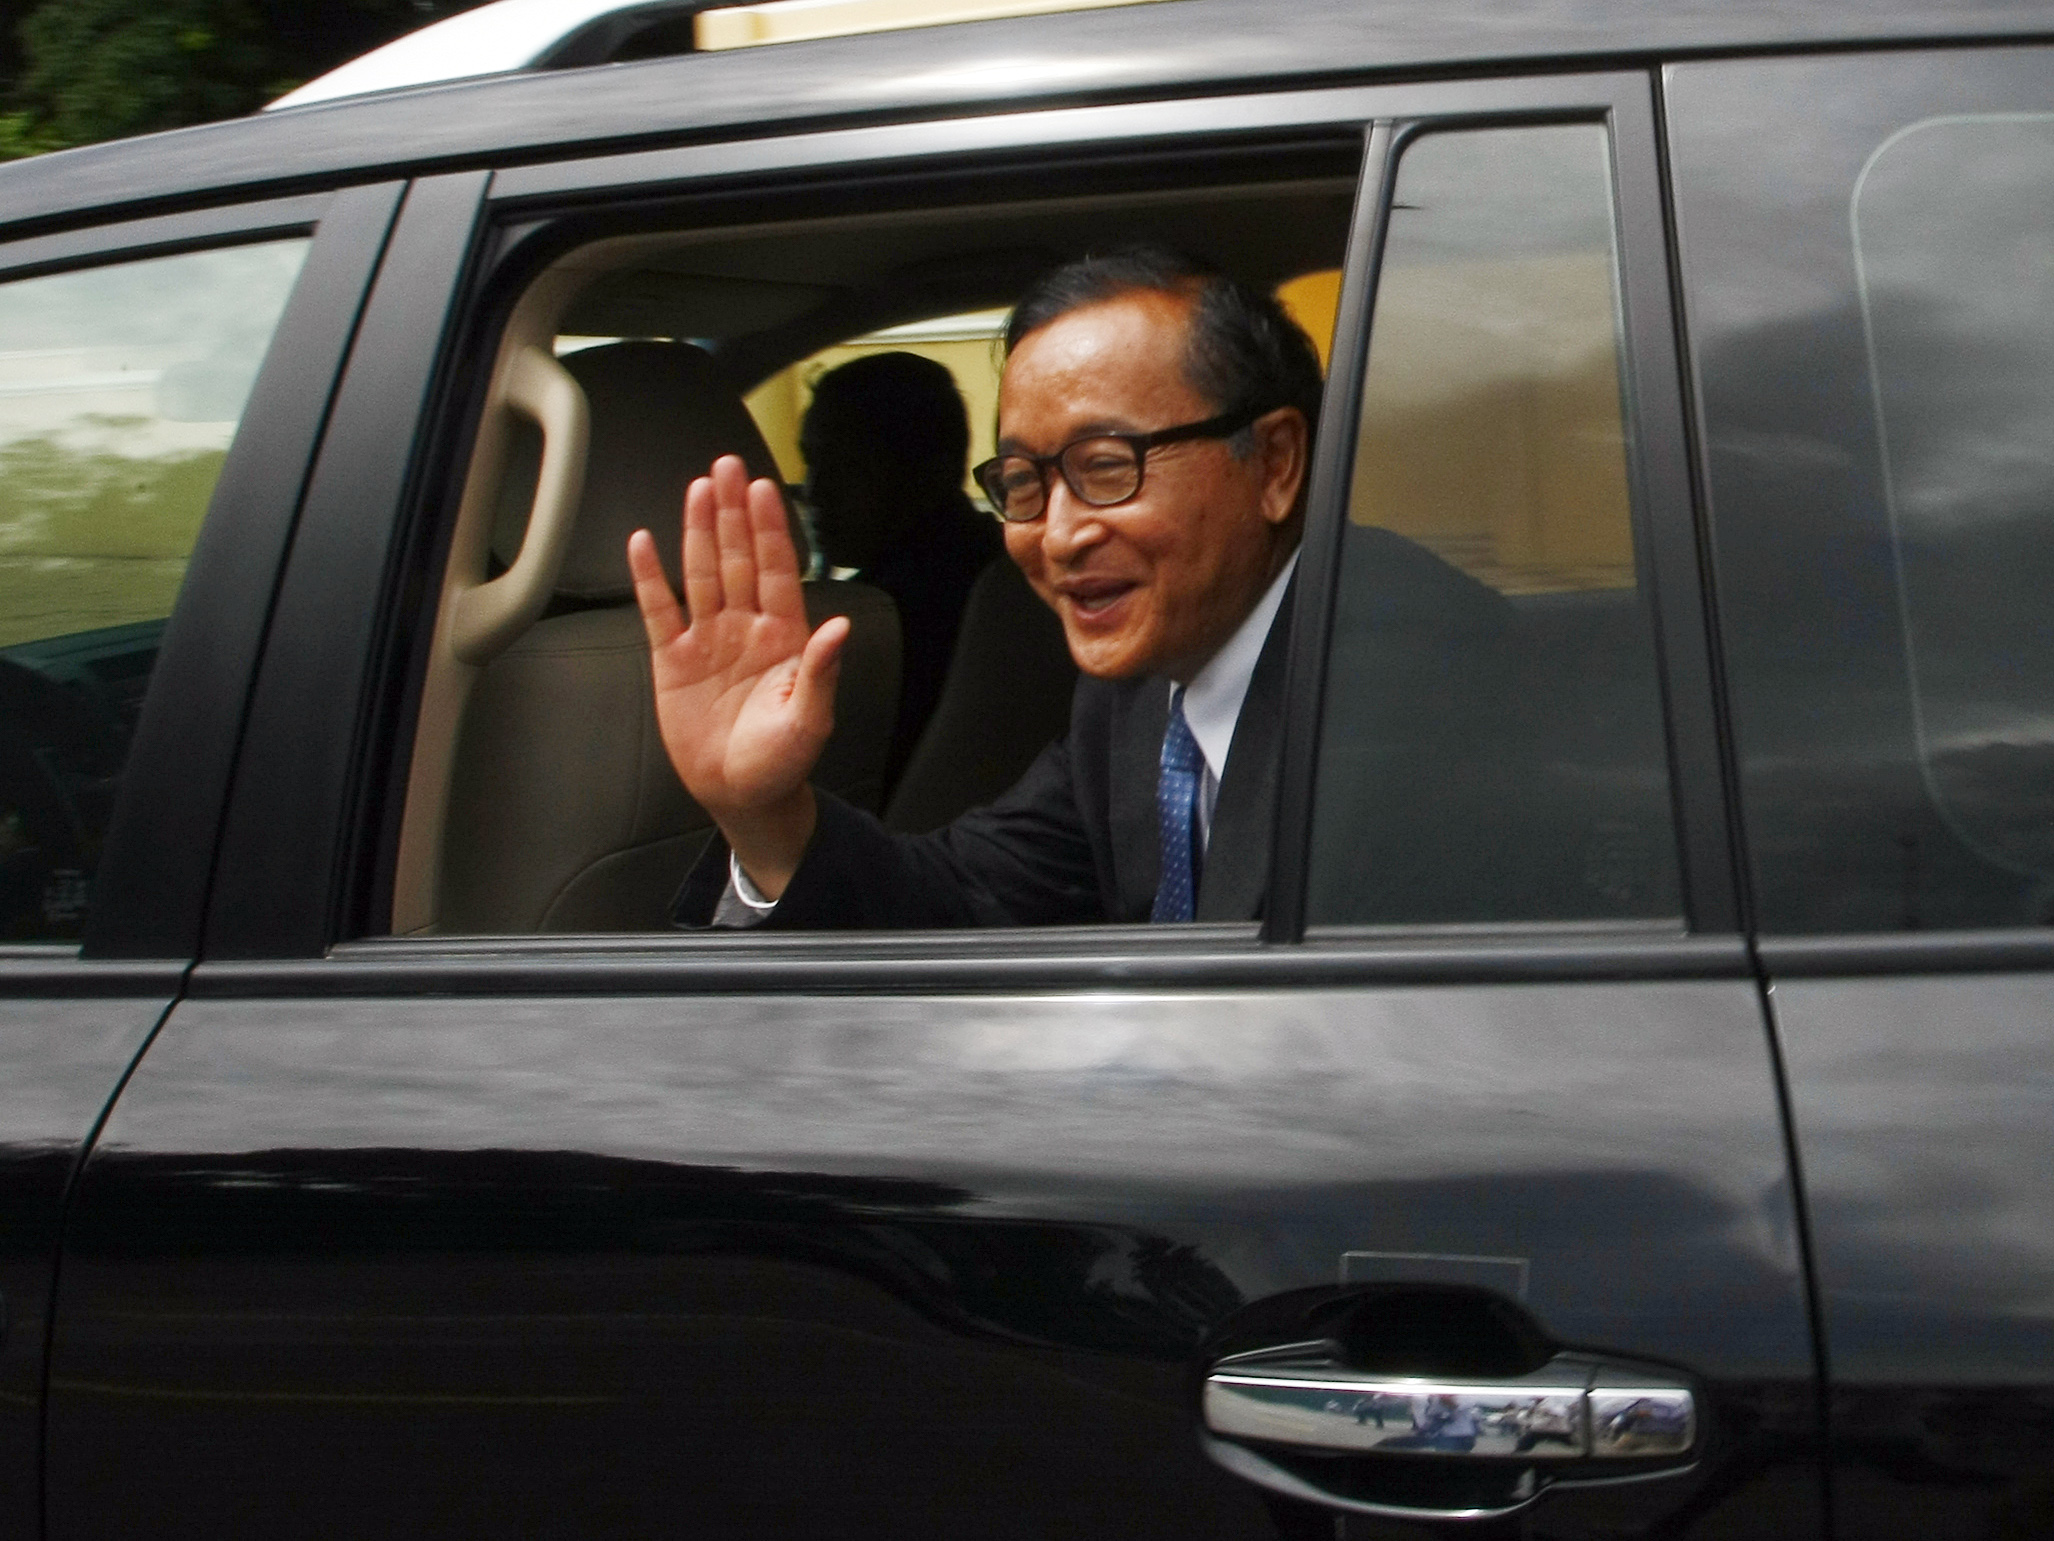 Cambodia's opposition leader Sam Rainsy waves from his car after a meeting in Phnom Penh. Photo: AP